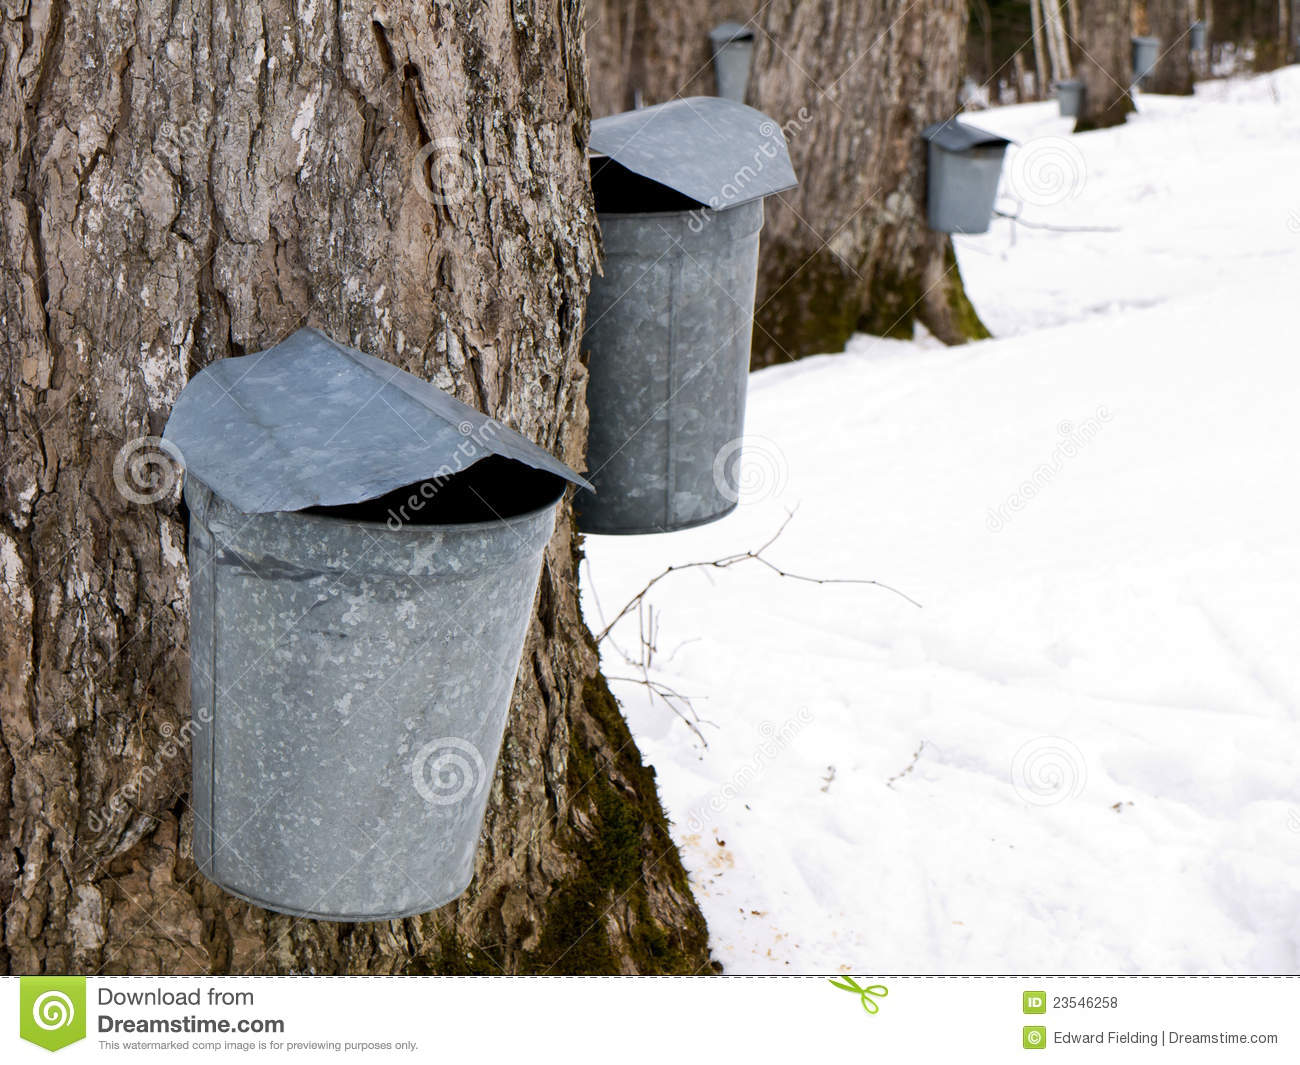 Late Winter Is Maple Sugaring Time In Vermont Sugar Maples Are Tapped